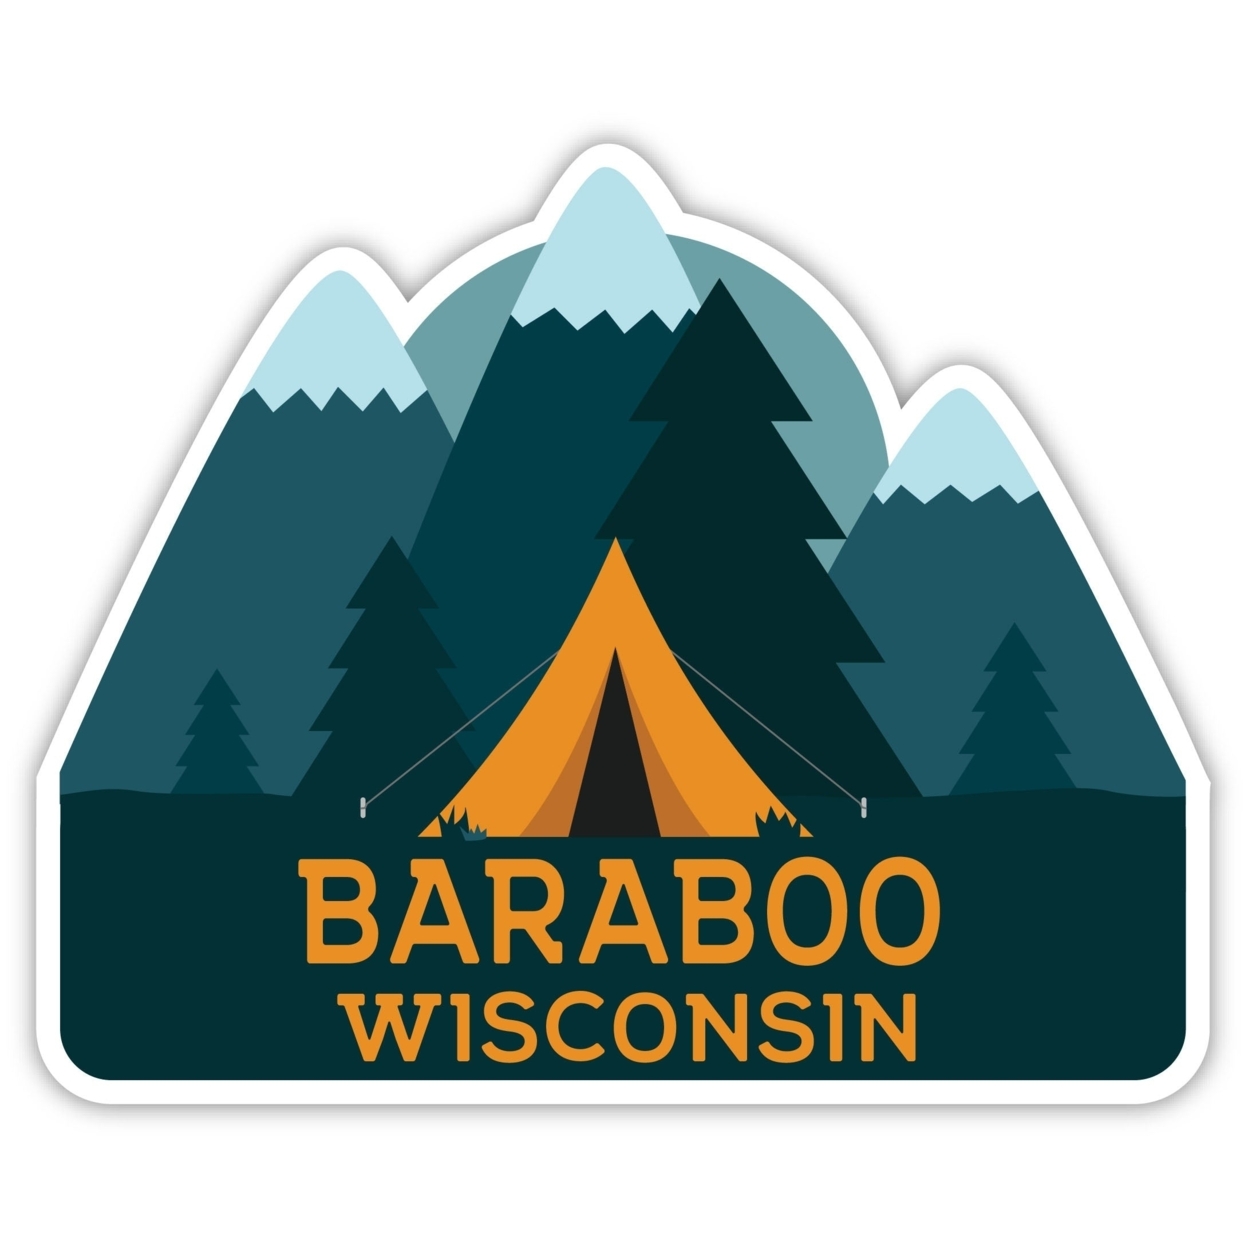 Baraboo Wisconsin Souvenir Decorative Stickers (Choose Theme And Size) - 4-Pack, 12-Inch, Tent